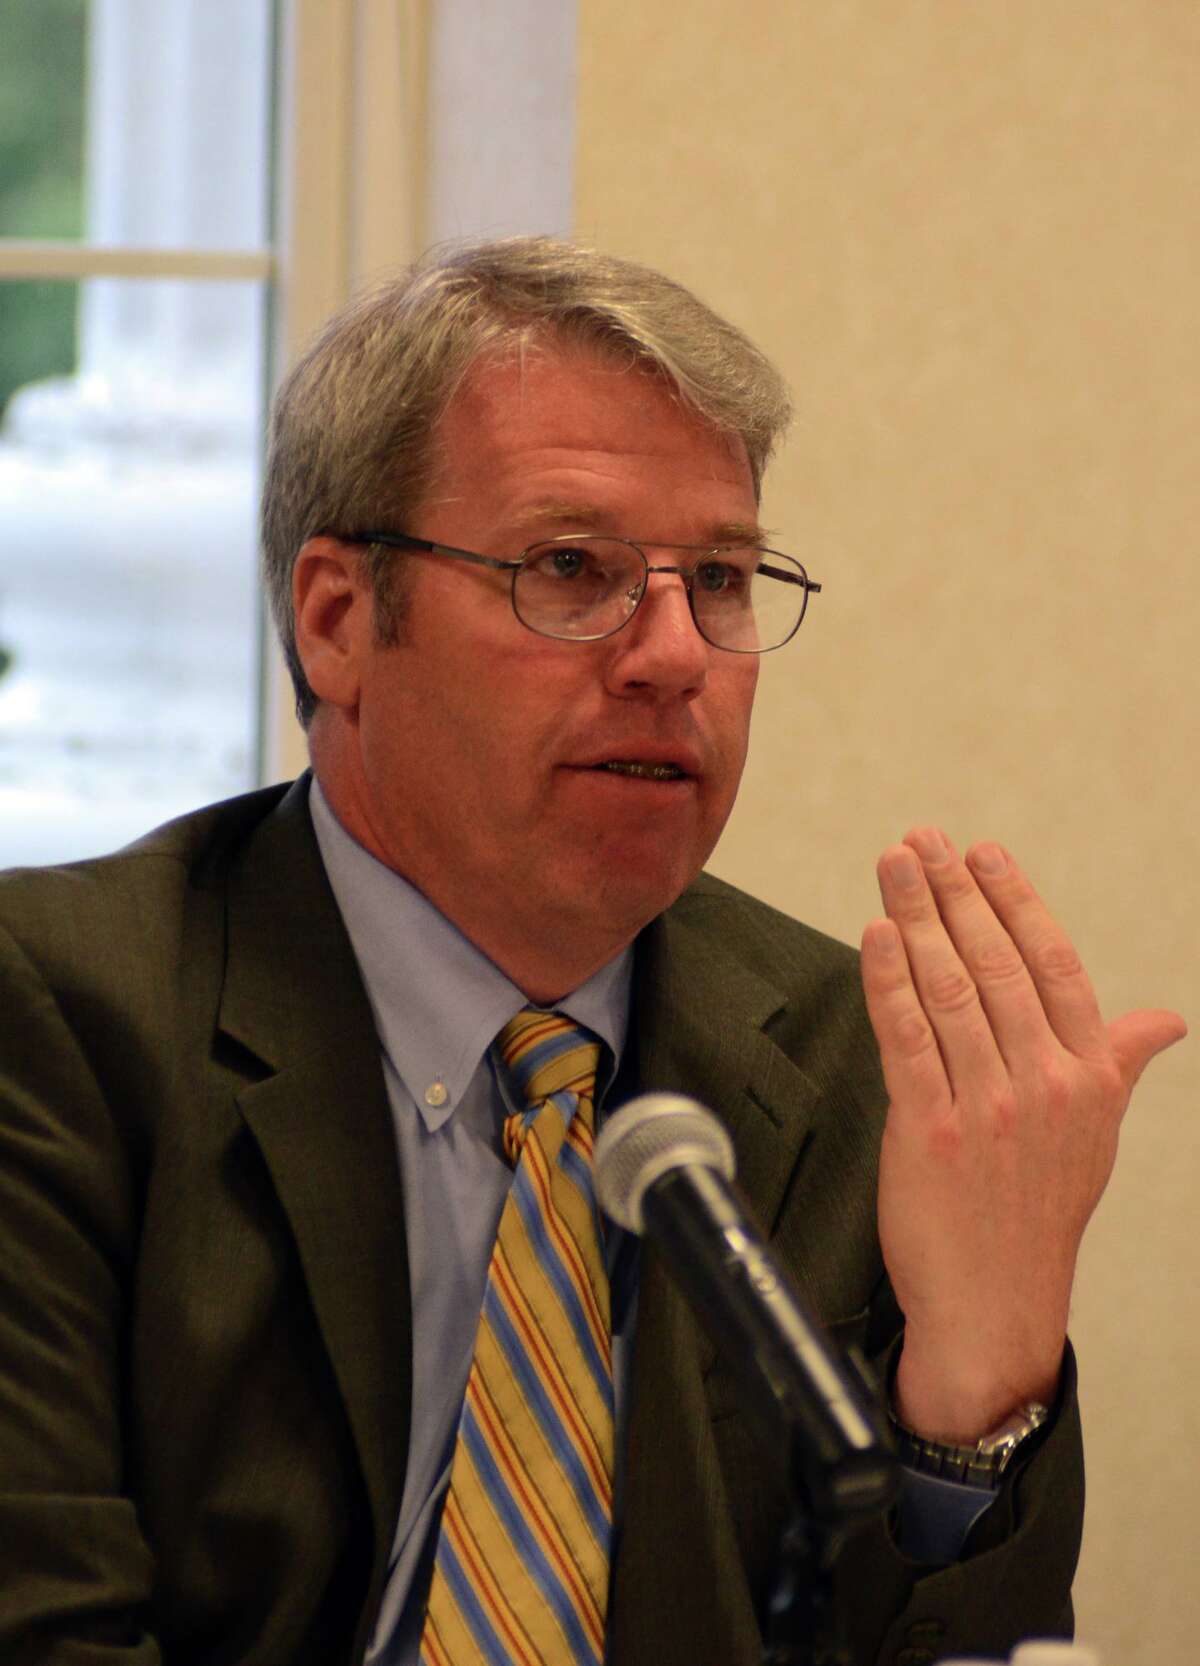 Michael Mason, member of the Board of Estimation and Taxation, seen here in 2012, said the committee was needed to make sure there is accountability and transparency. He said it was unfortunate that there had to be one, but it was a situation created by the Democrats.